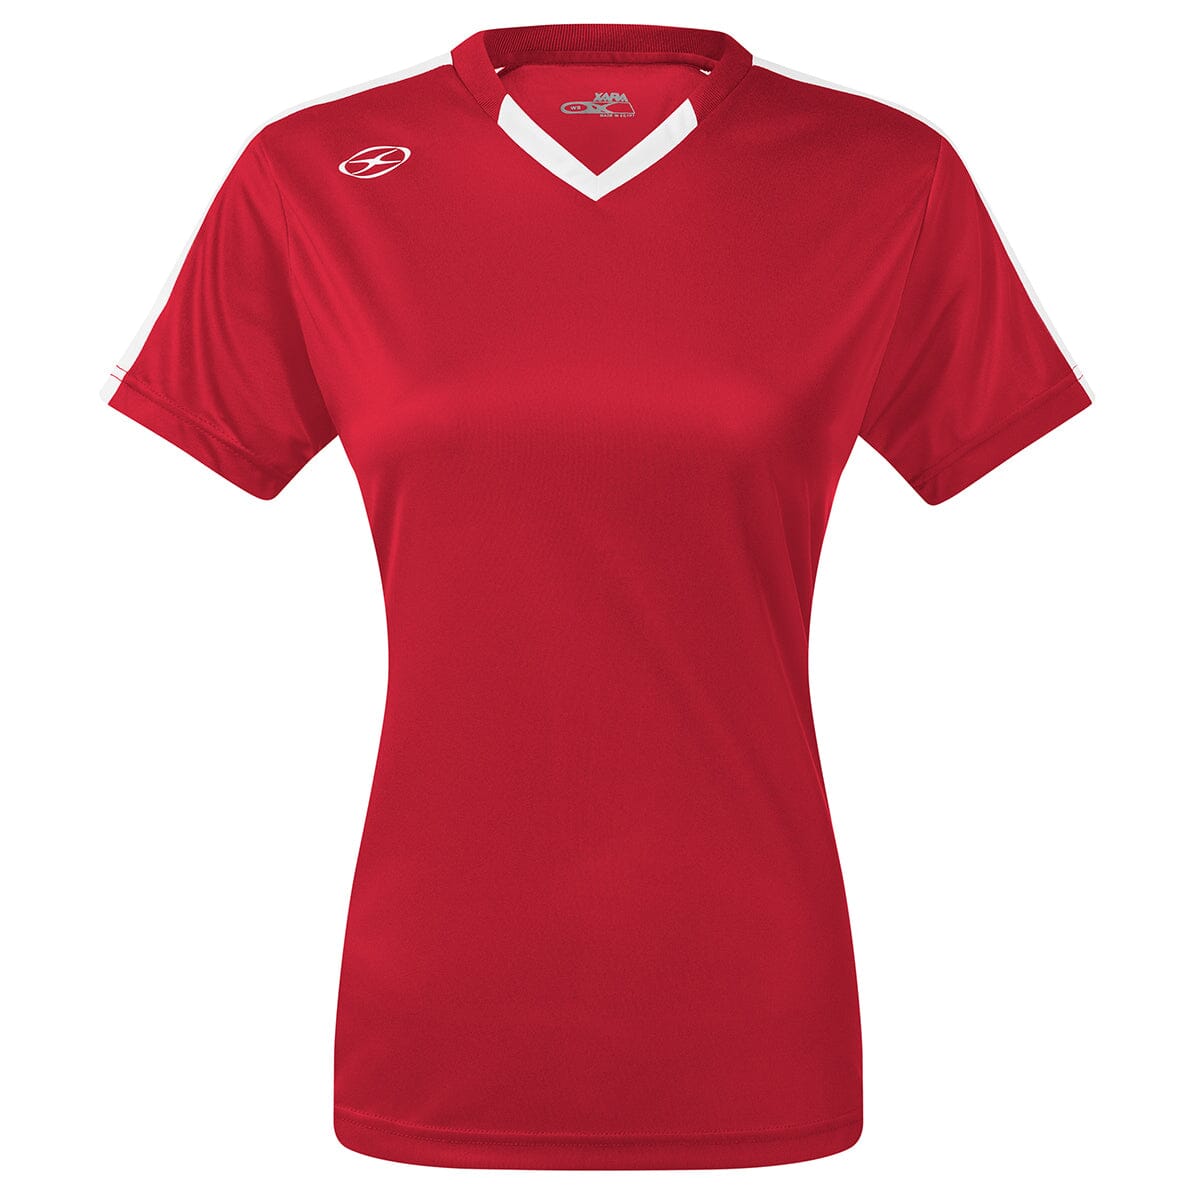 Britannia Jersey - Home Colors - Female Shirt Xara Soccer Red/White Womens Youth Large 